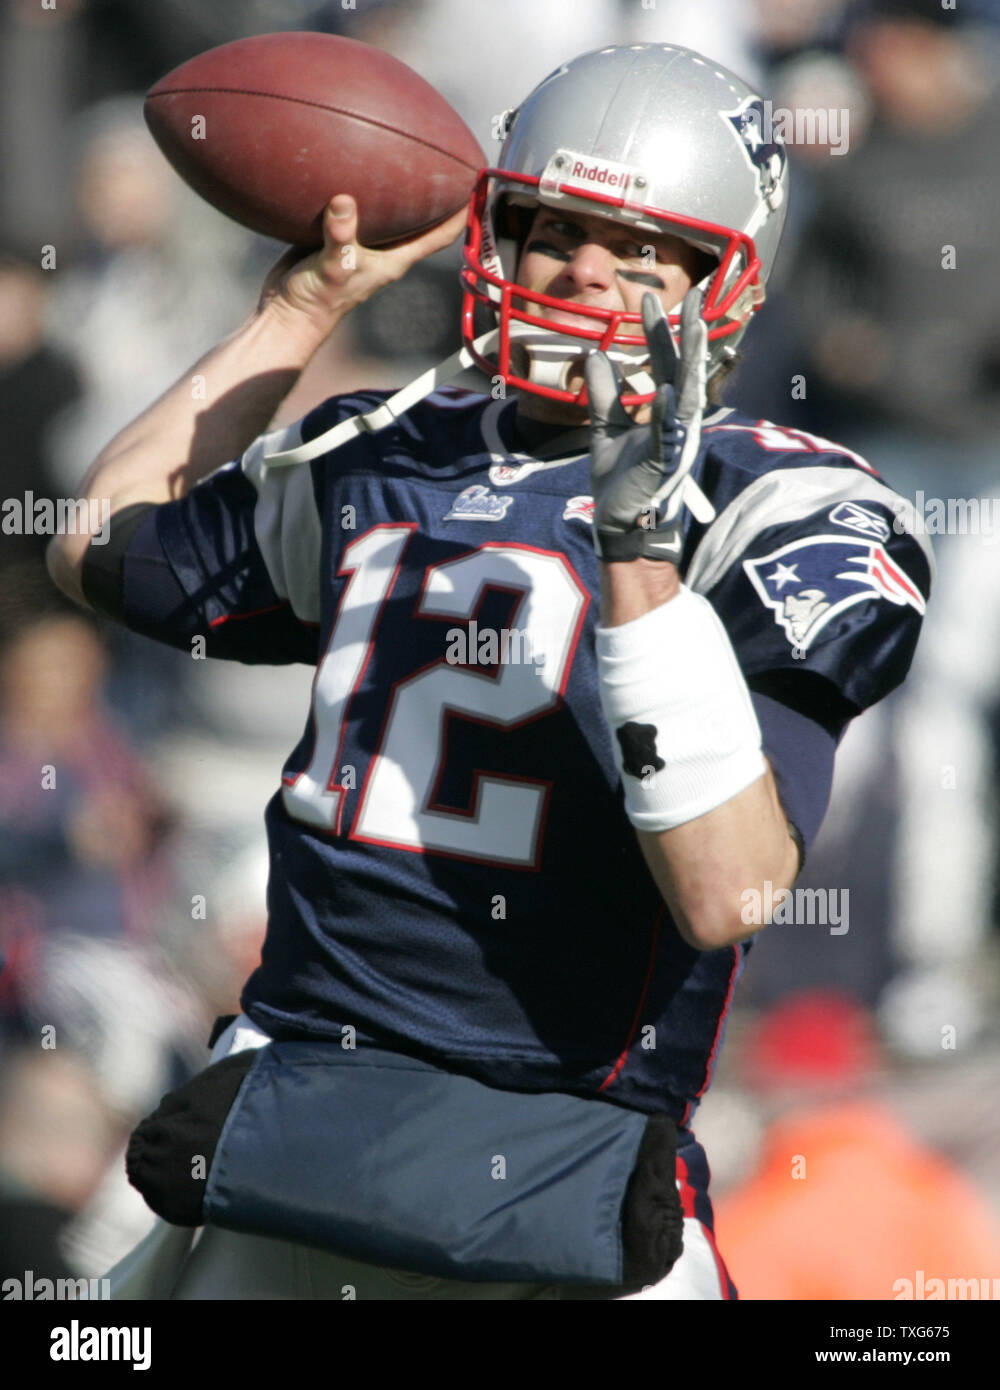 New England Patriots quarterback Tom Brady (12) throws a pass during warm-ups before the AFC wildcard playoff game against the Baltimore Ravens at Gillette Stadium in Foxboro, Massachusetts on January 10, 2010.    UPI/Matthew Healey Stock Photo